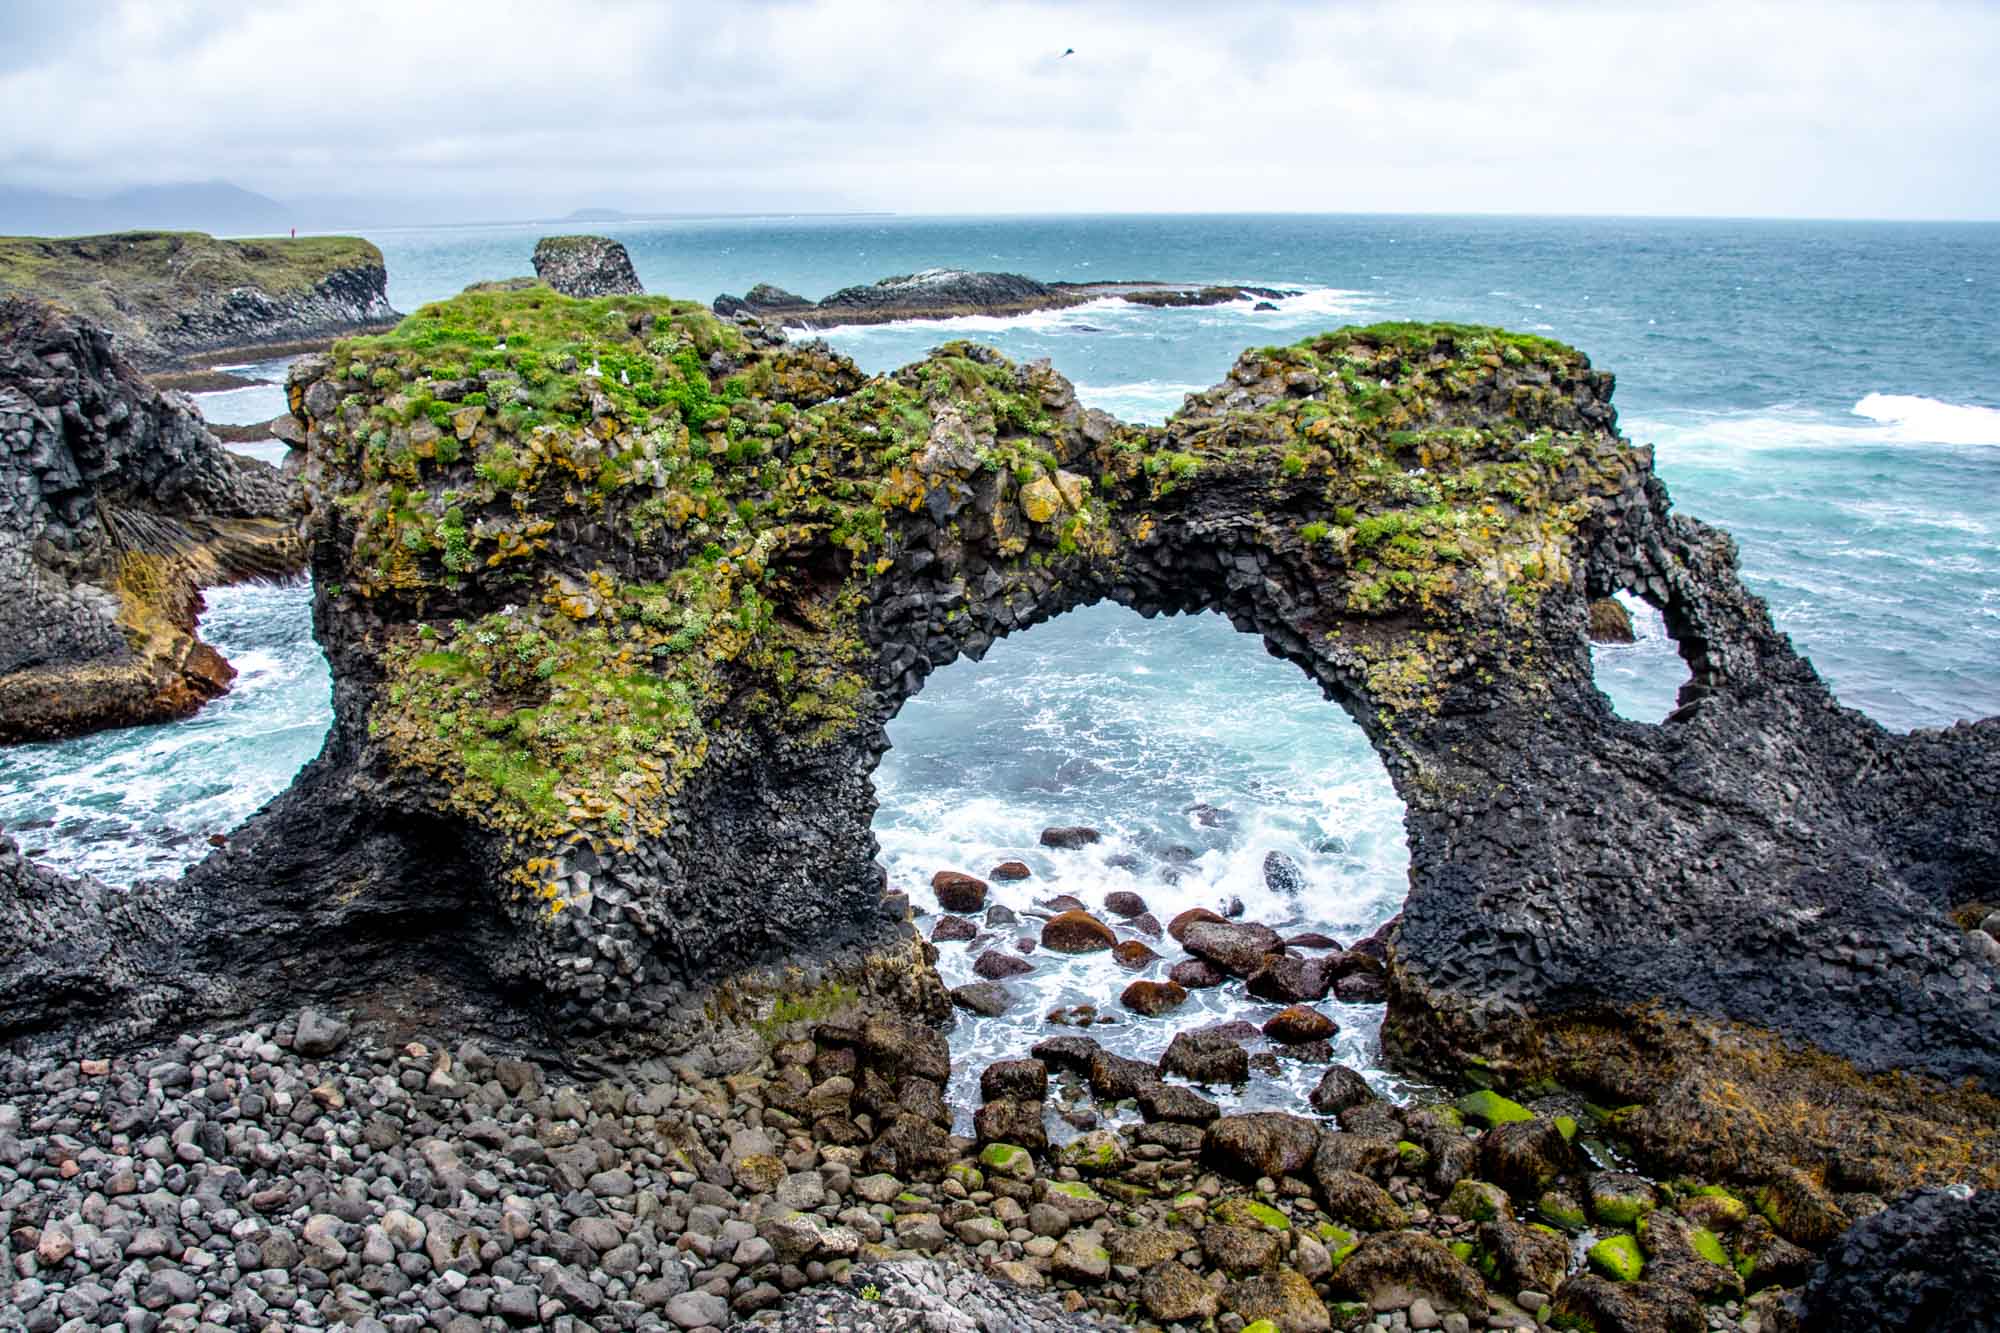 Stone arch in the ocean